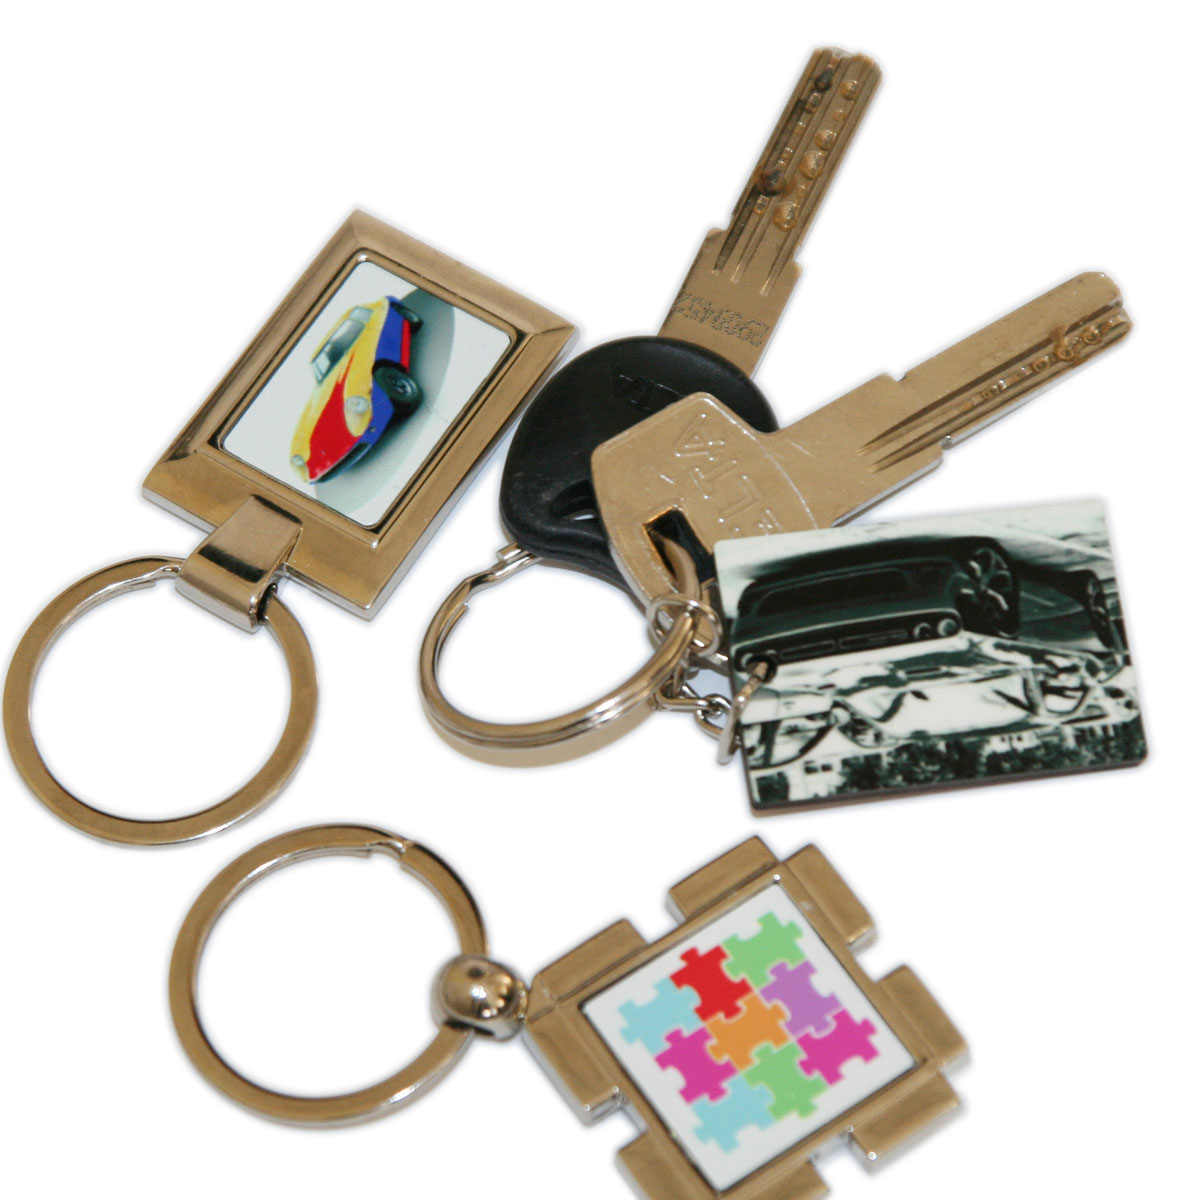 Metal square keychain for sublimation